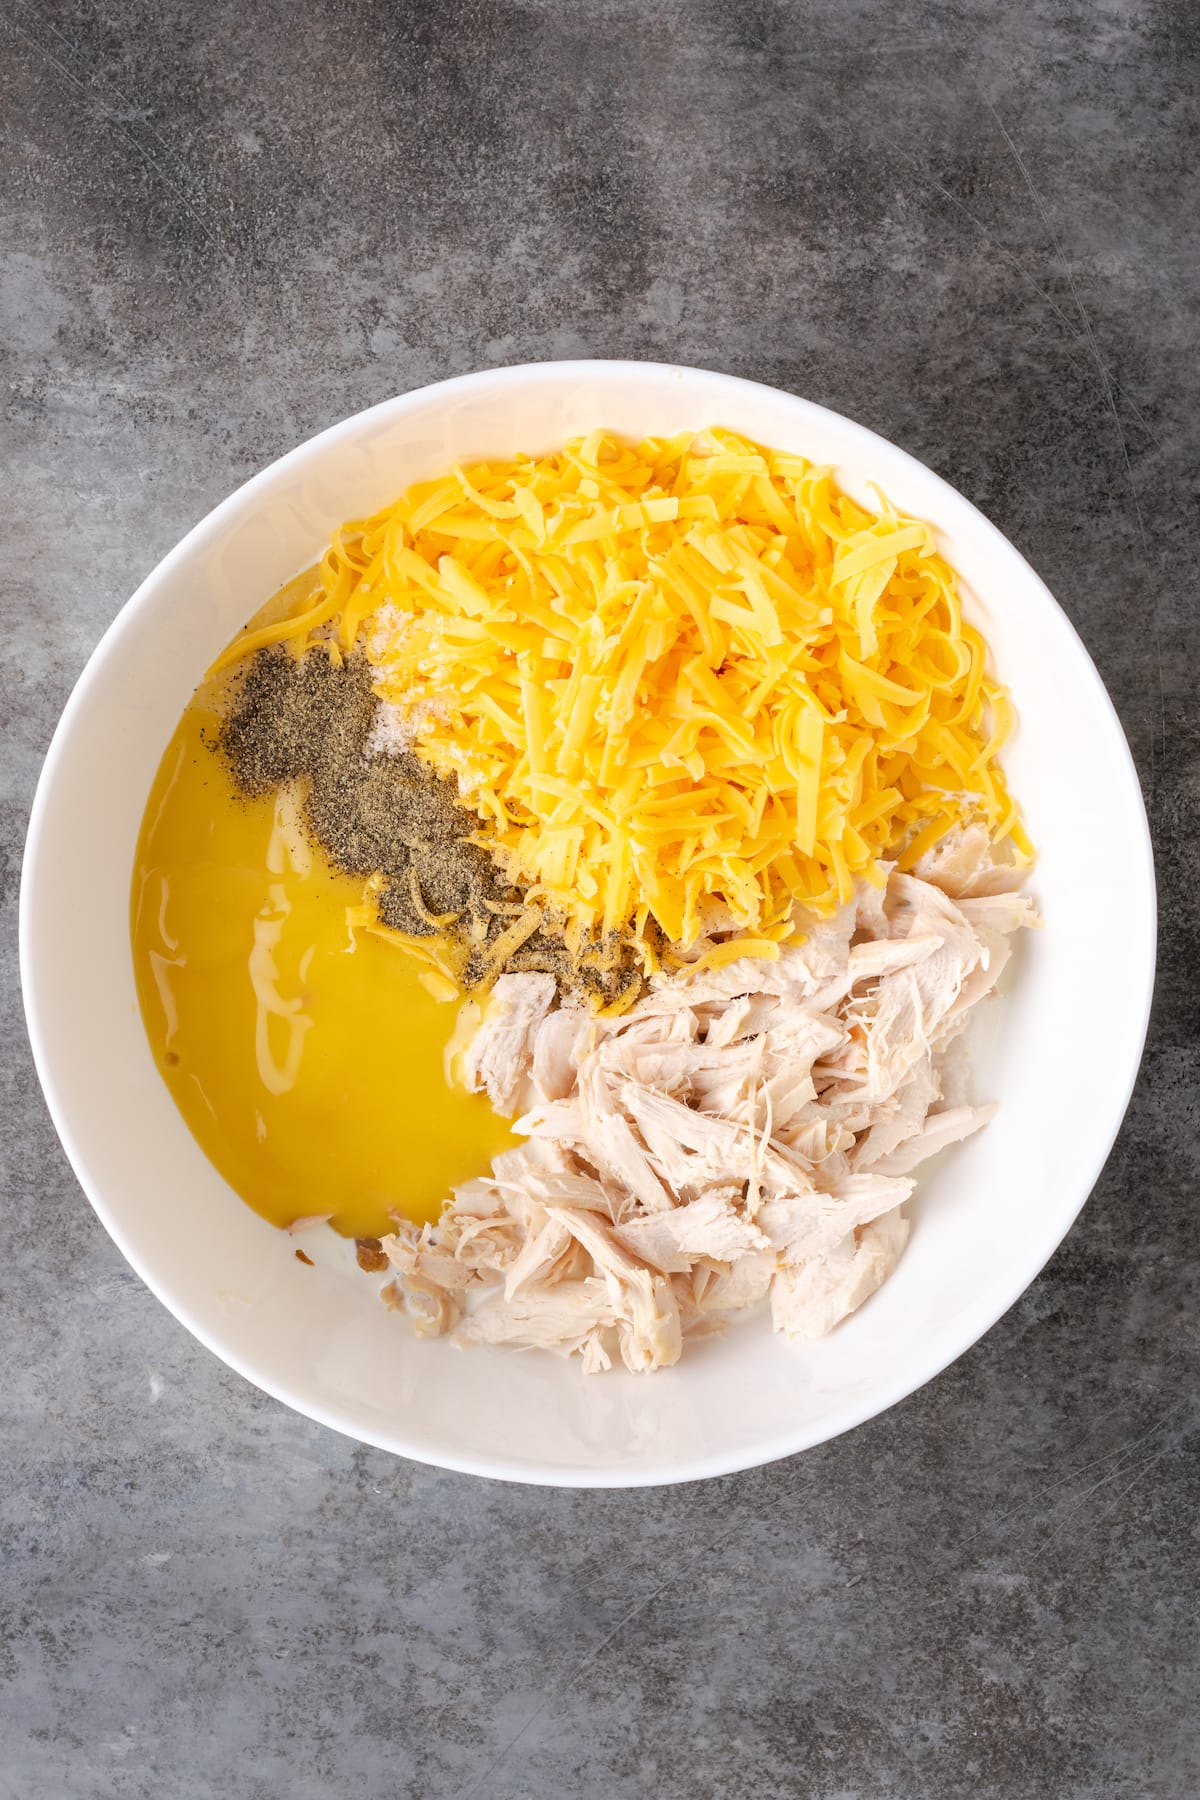 The ingredients for chicken noodle casserole cream sauce combined in a mixing bowl.